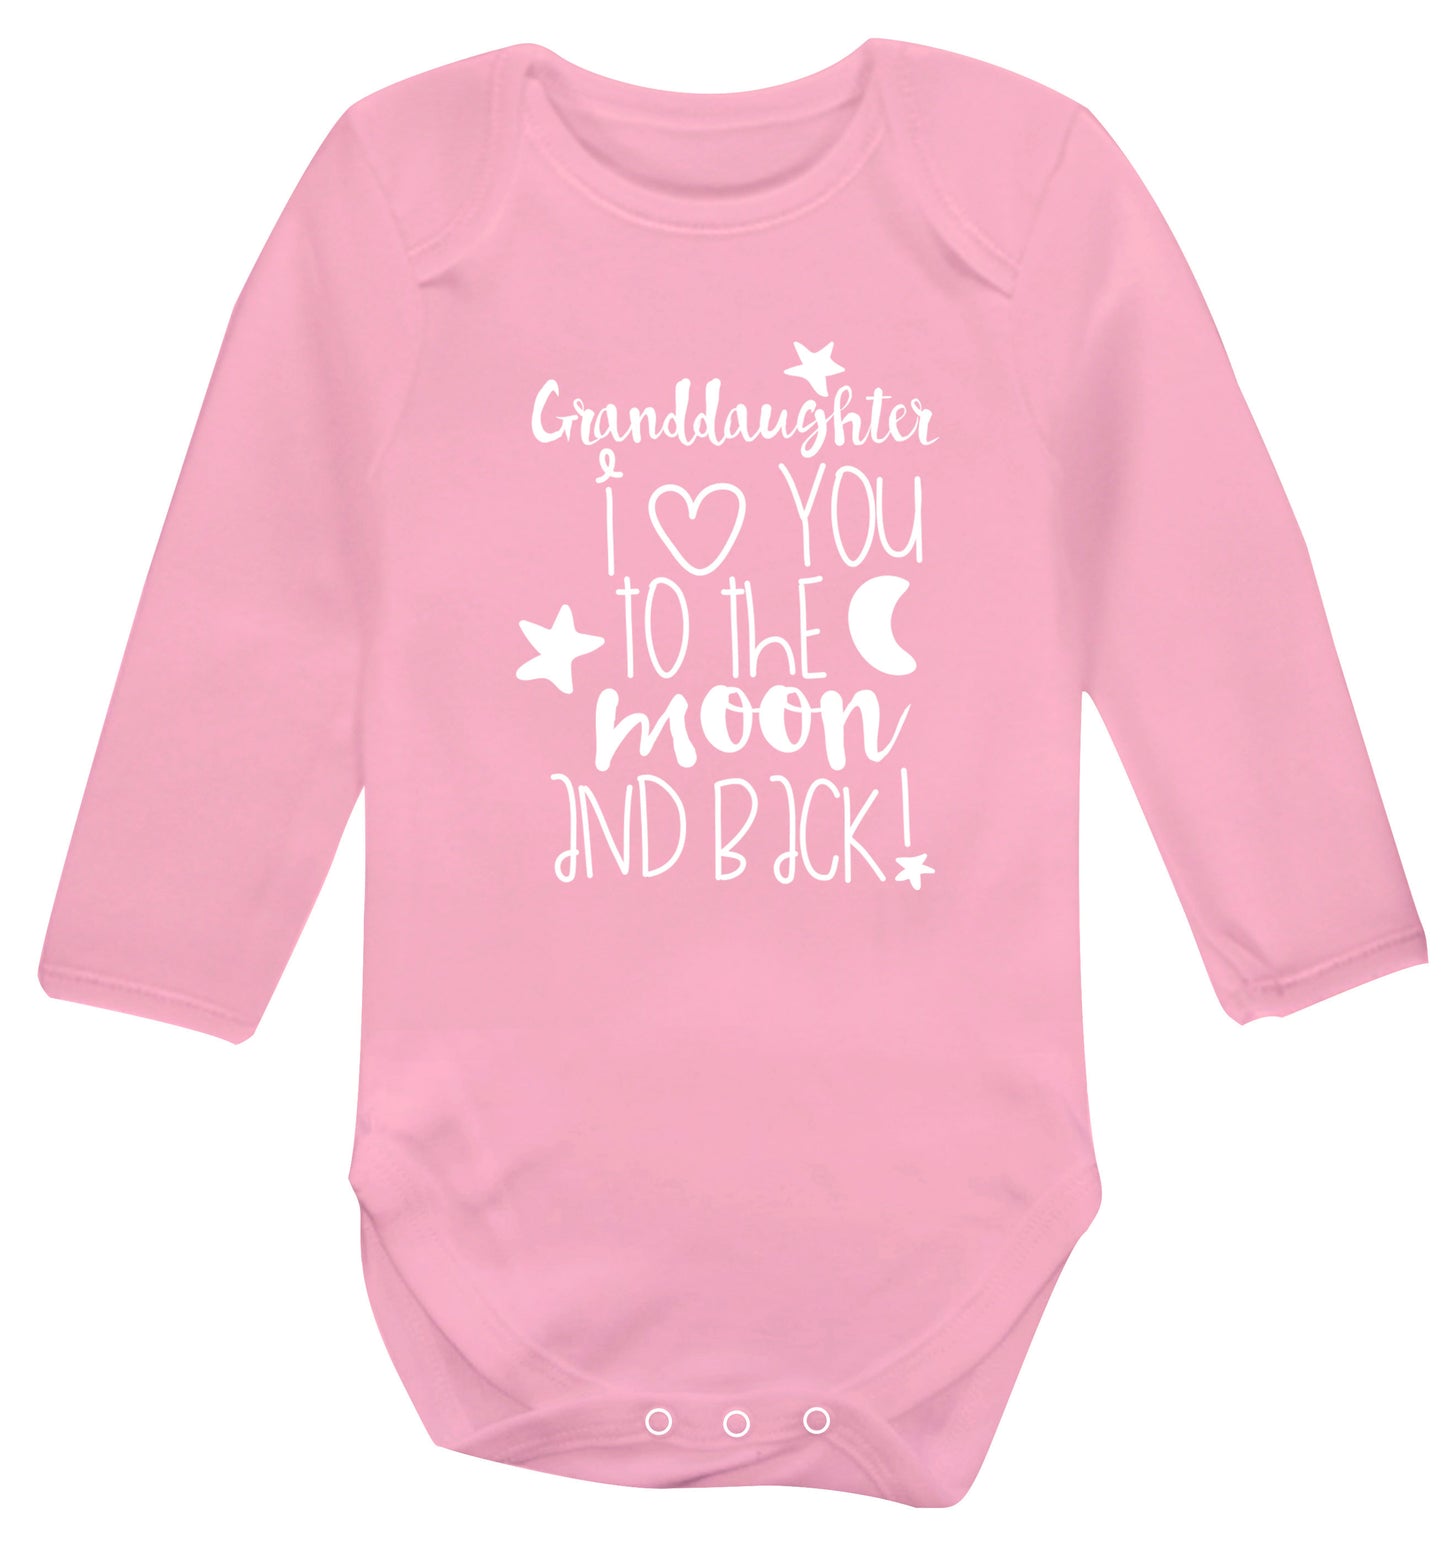 Granddaughter I love you to the moon and back Baby Vest long sleeved pale pink 6-12 months